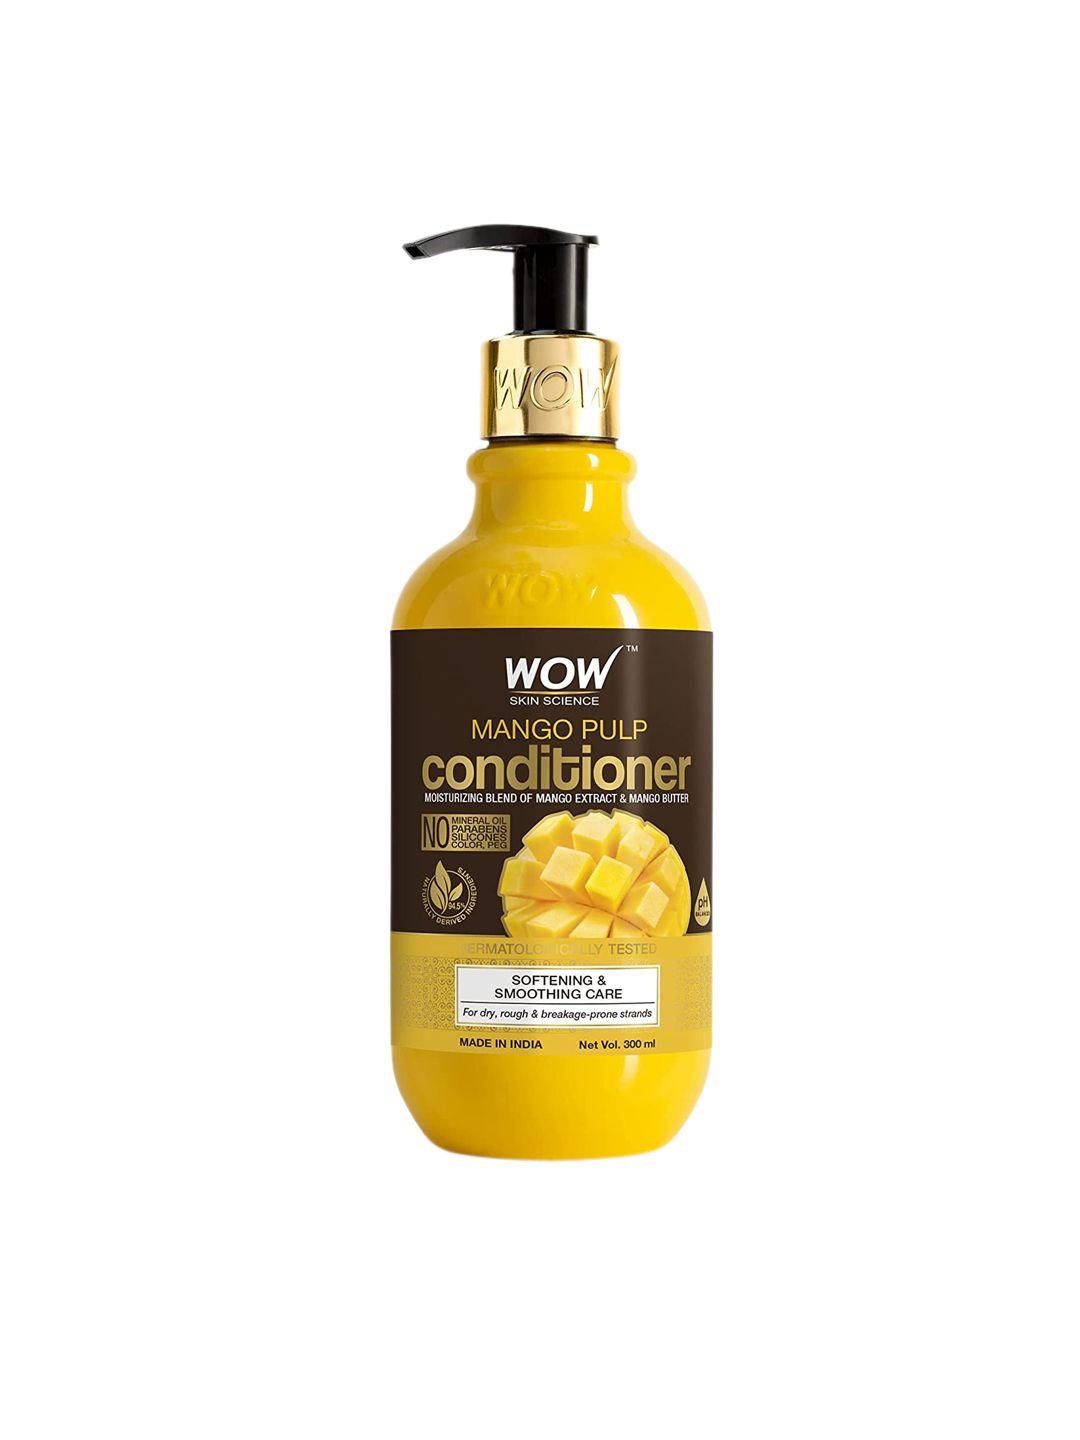 wow skin science mango pulp hair conditioner for healthy hair - 300ml